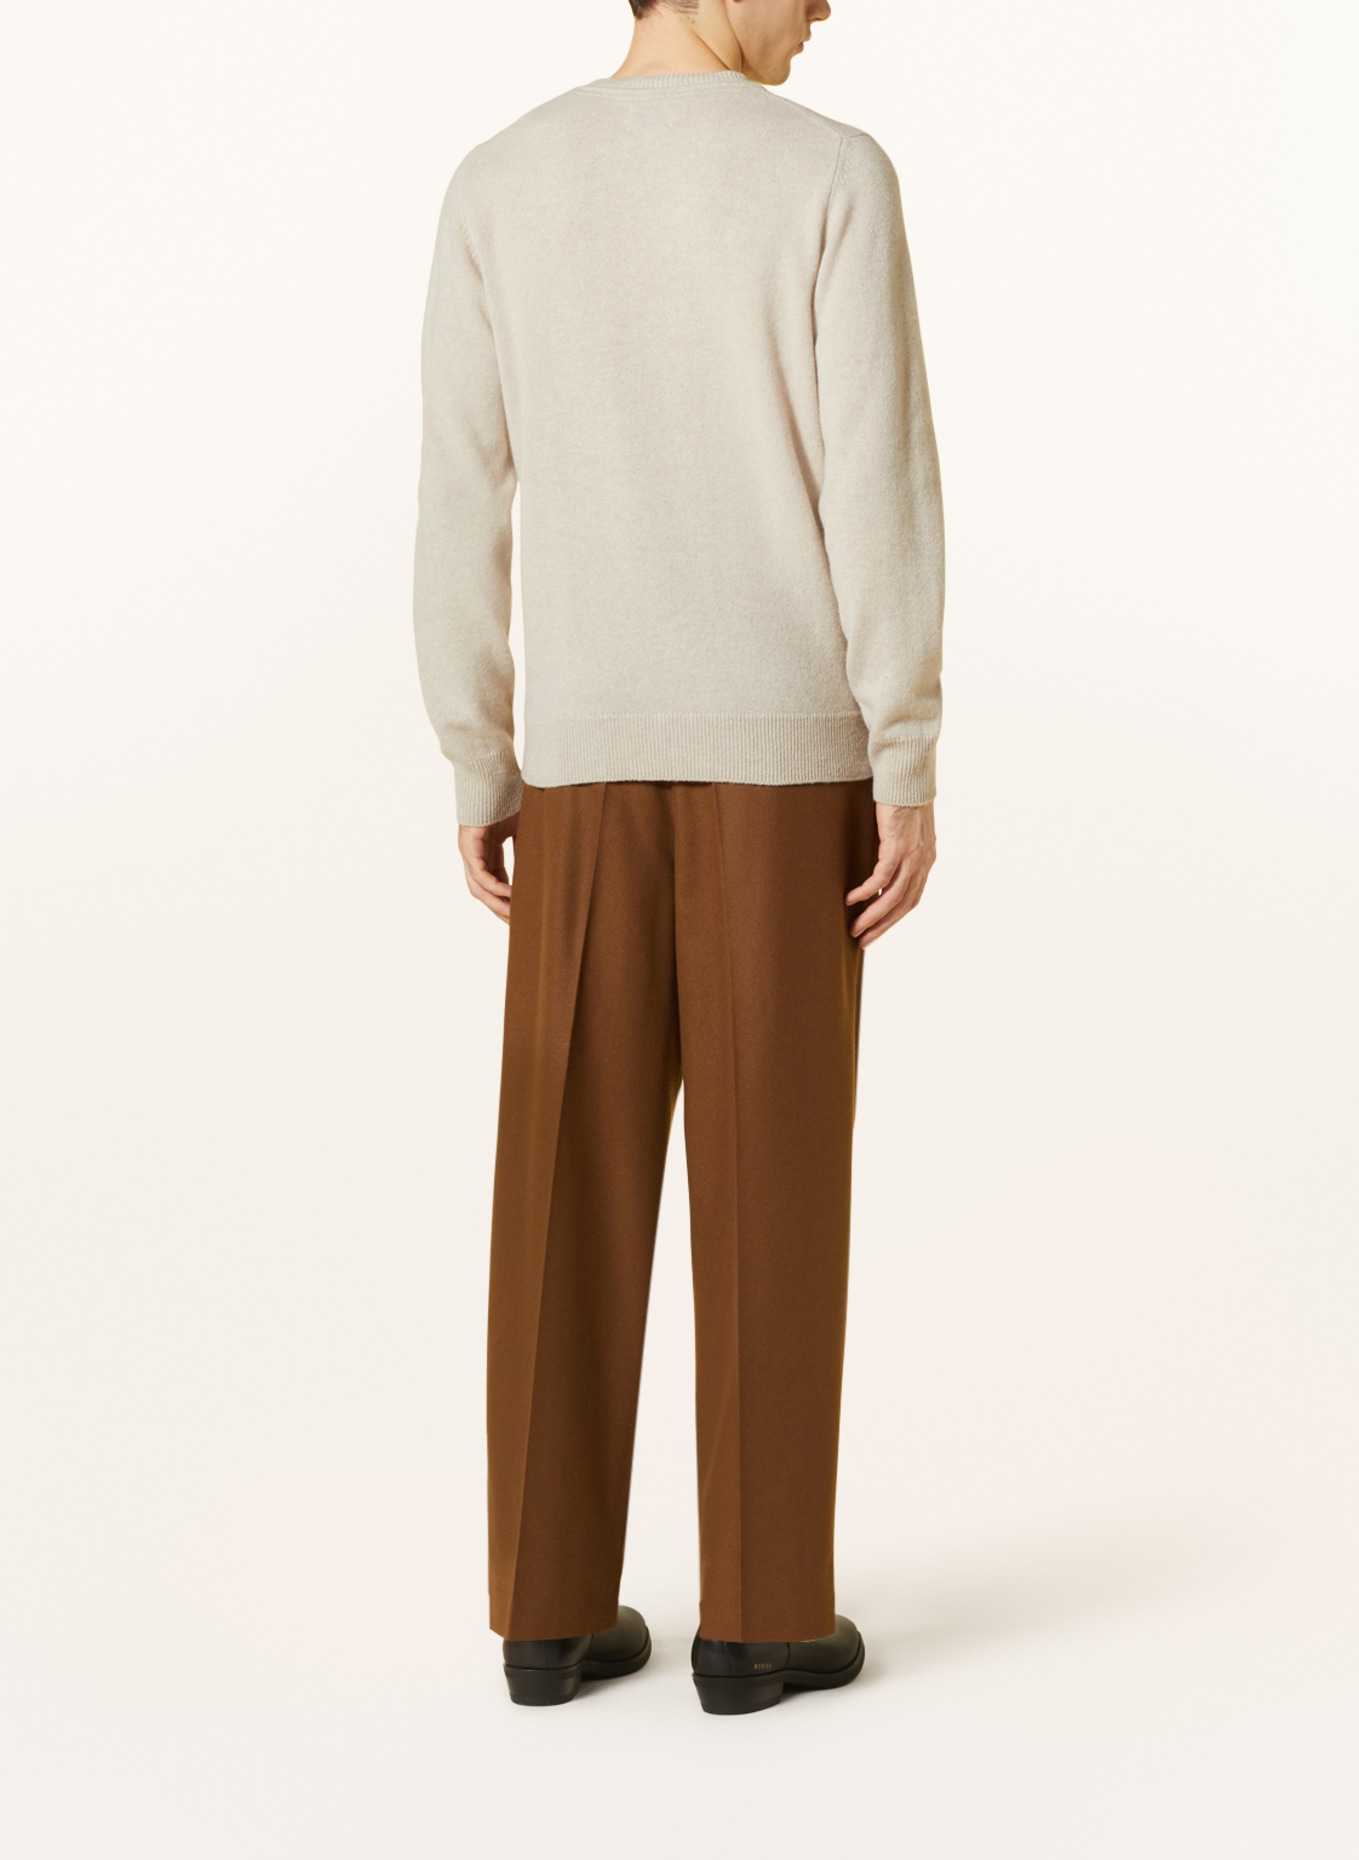 NORSE PROJECTS Pullover SIGFRED, Farbe: CREME (Bild 3)